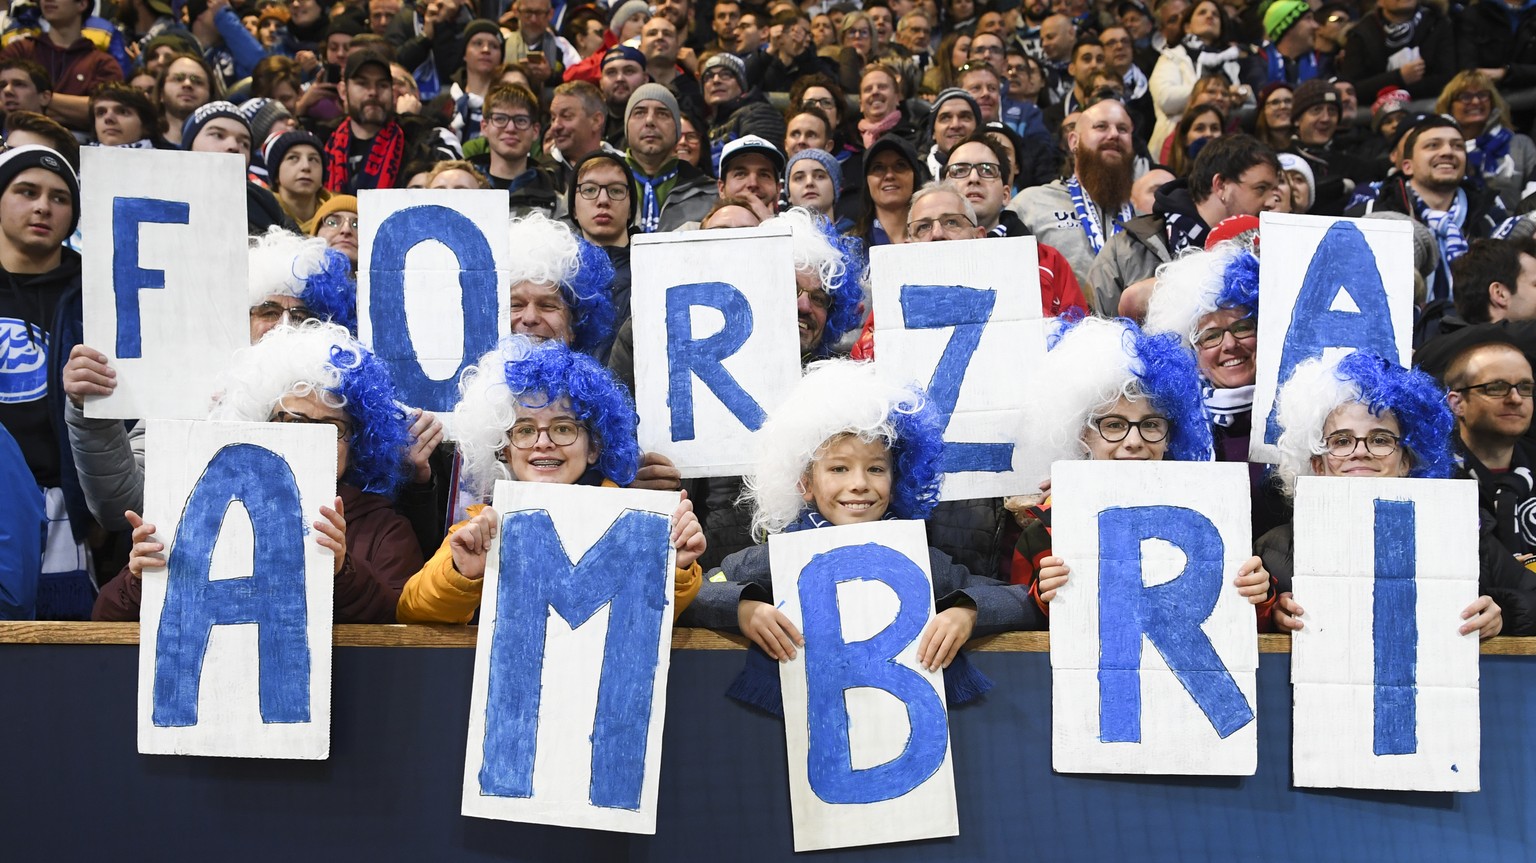 Ambri fans during the game between HC Ambri-Piotta and Salavat Yulaev Ufa, at the 93th Spengler Cup ice hockey tournament in Davos, Switzerland, Thursday, December 26, 2019. (KEYSTONE/Gian Ehrenzeller ...